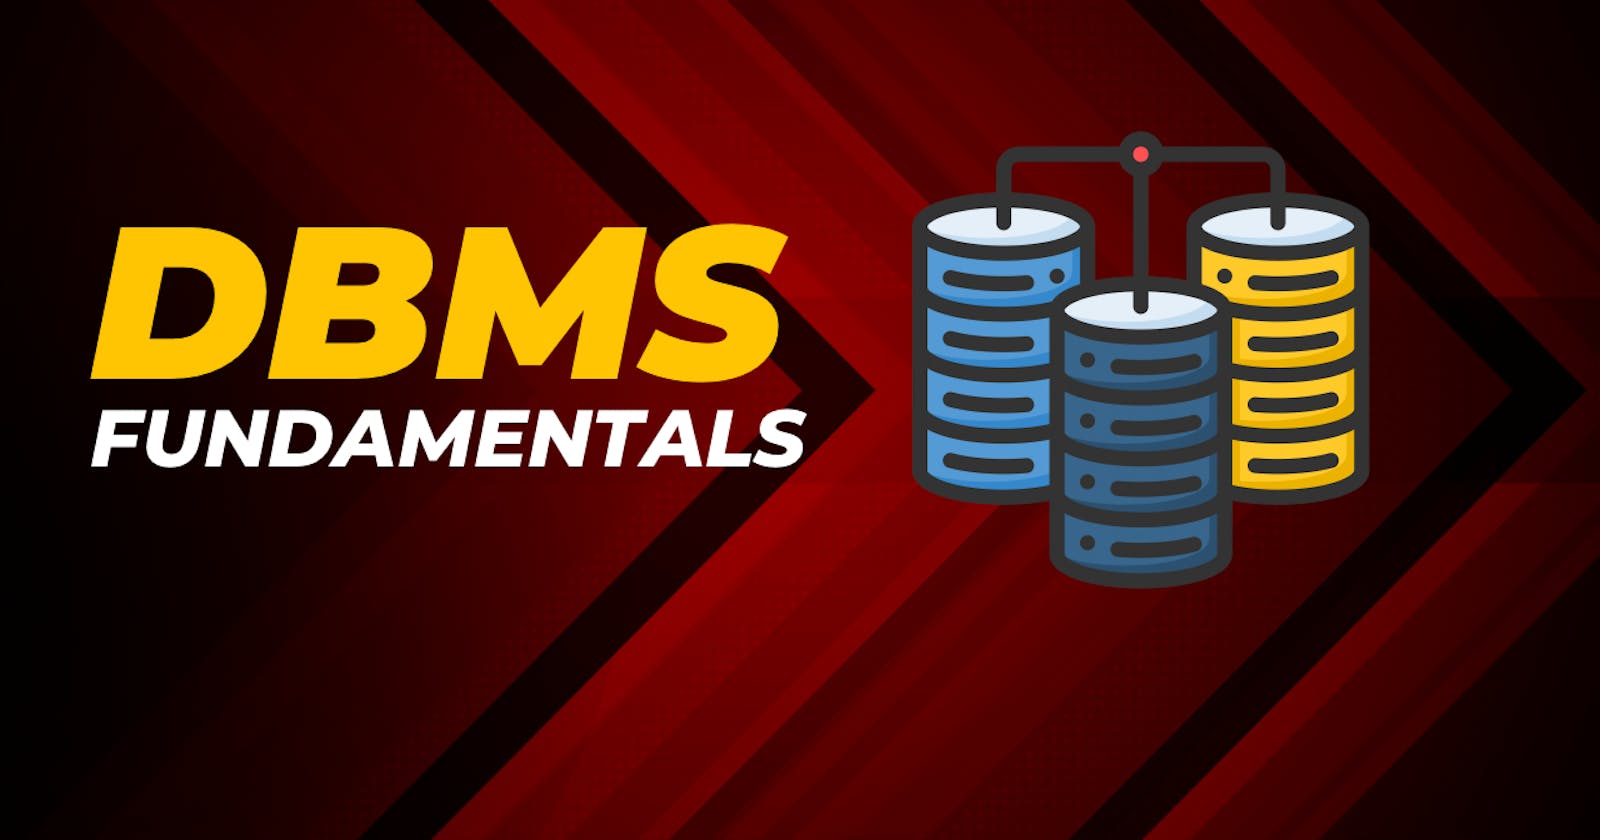 The Fundamentals of Database Management Systems